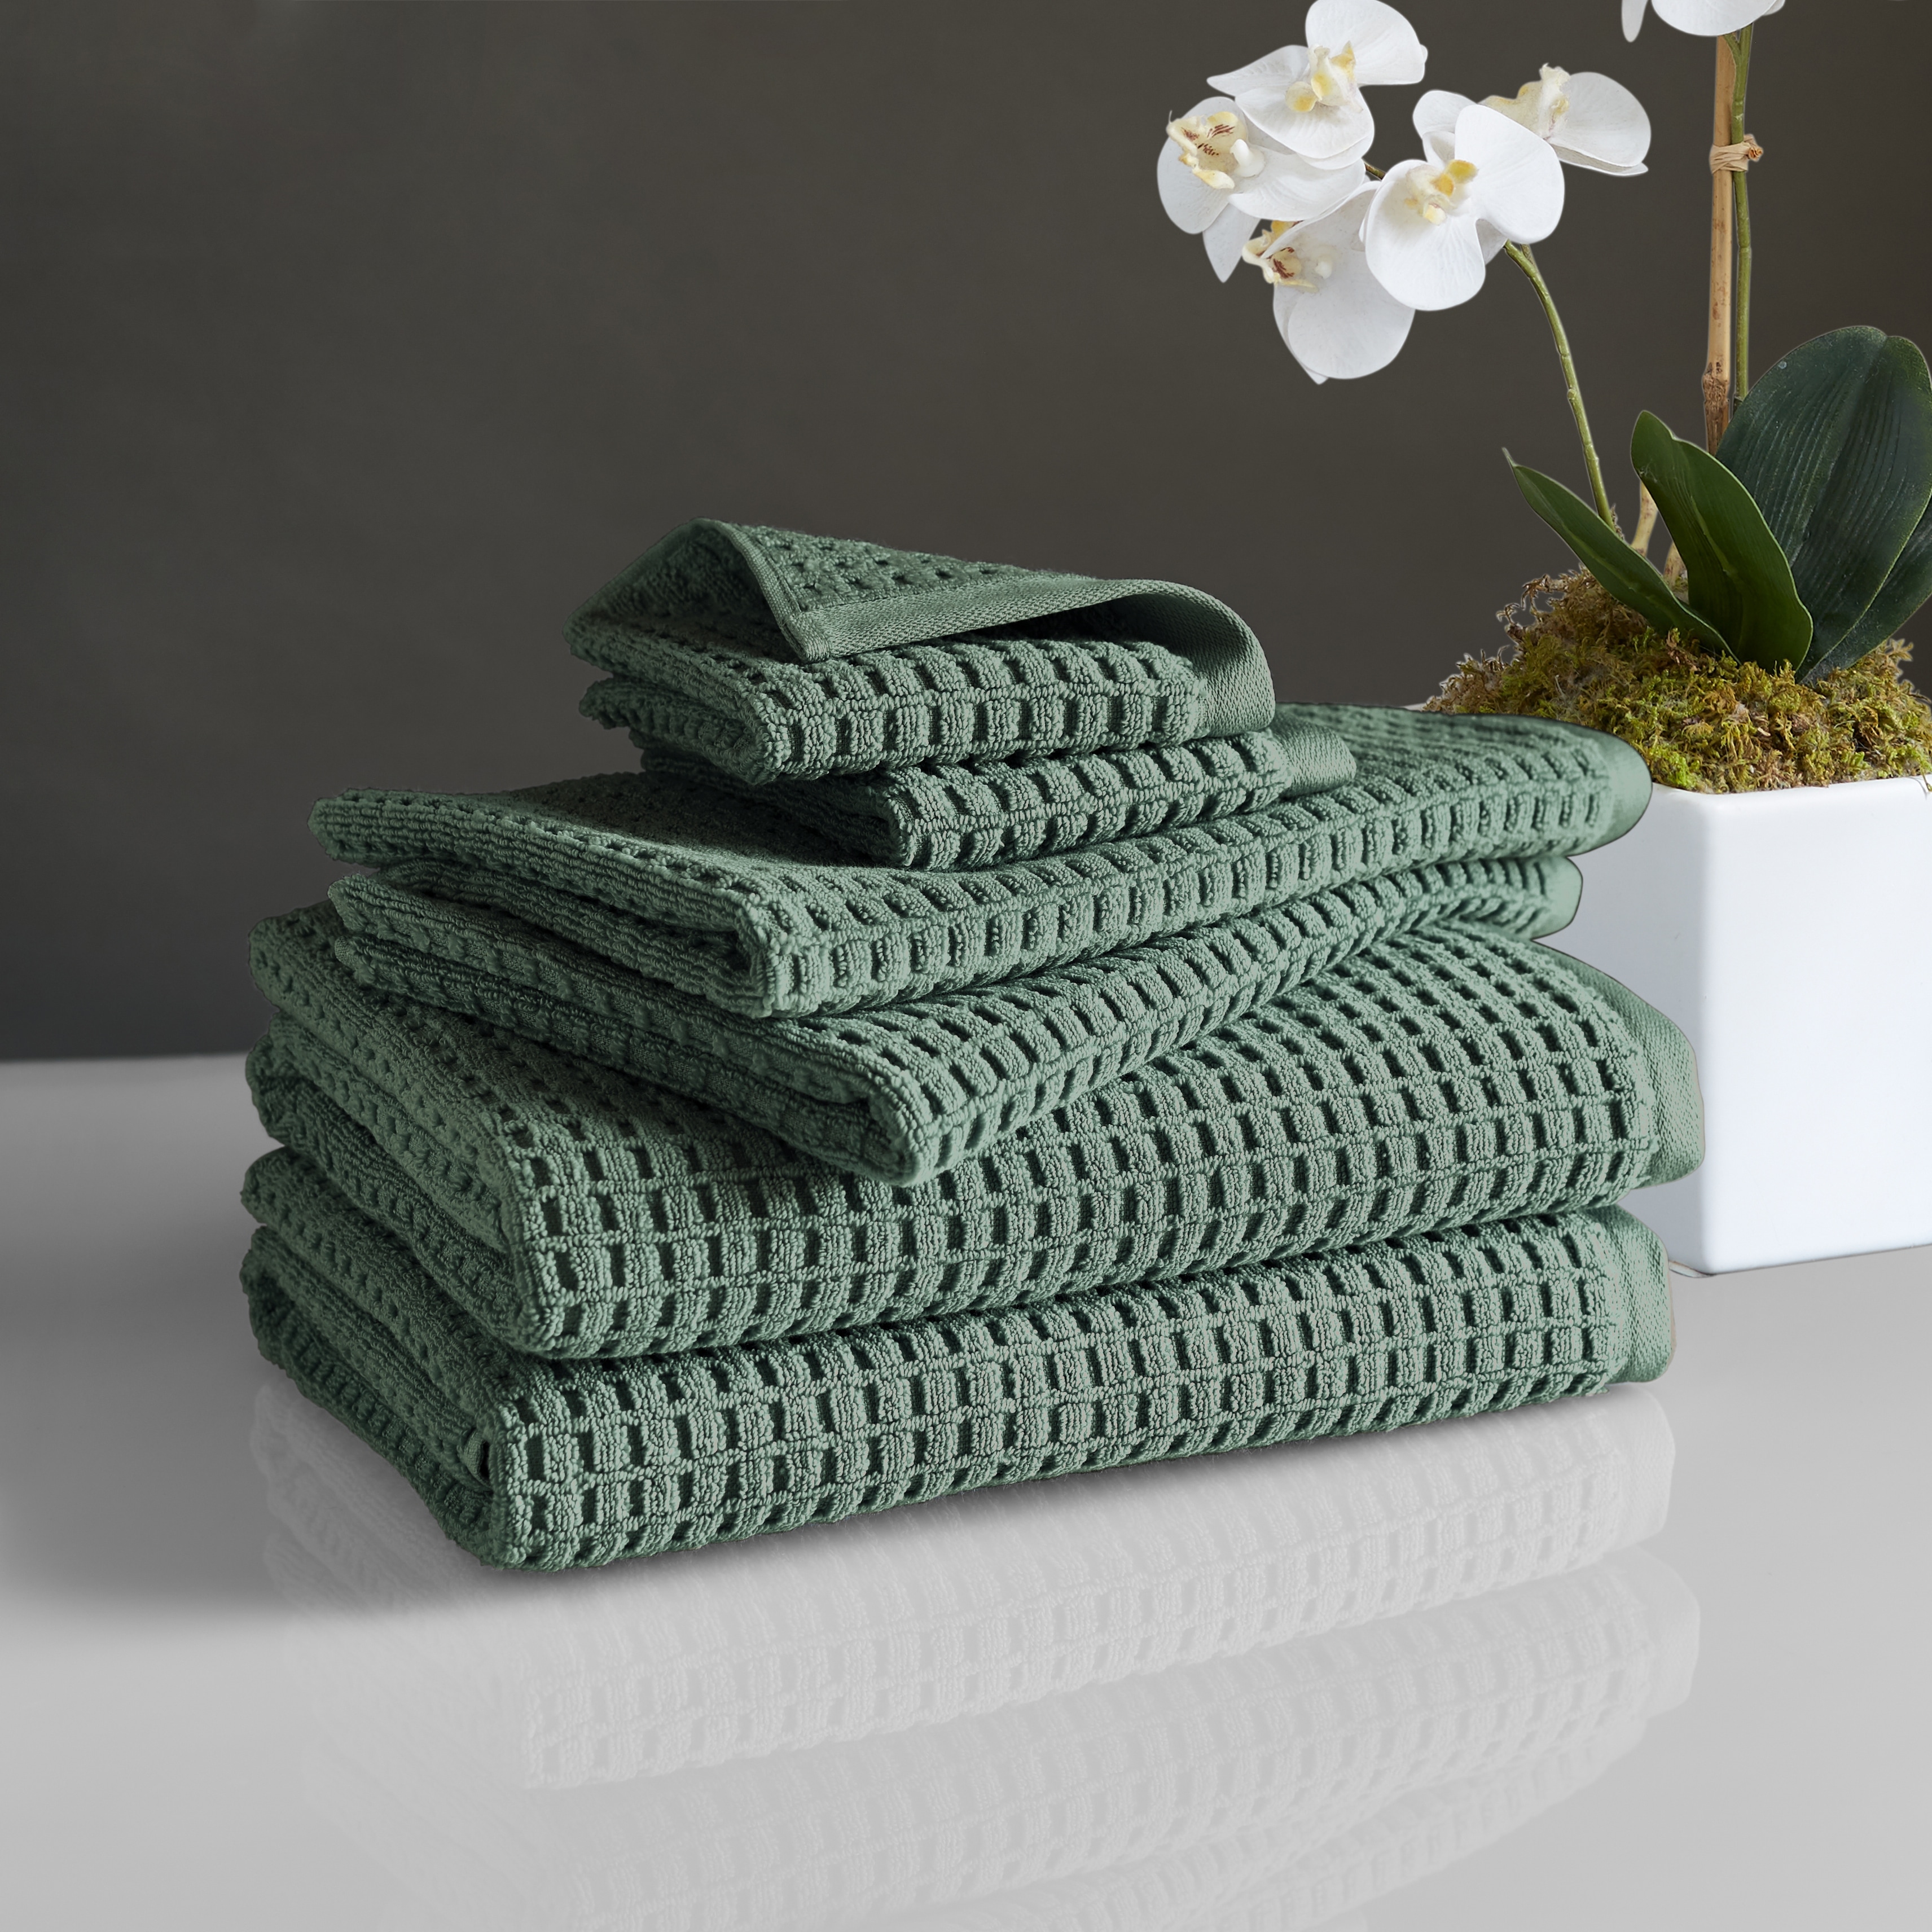 https://ak1.ostkcdn.com/images/products/is/images/direct/e489f985c91c2ae1efc9ae52367dcf22a17bd4f4/DKNY-Quick-Dry-6-pc-Towel-Set.jpg